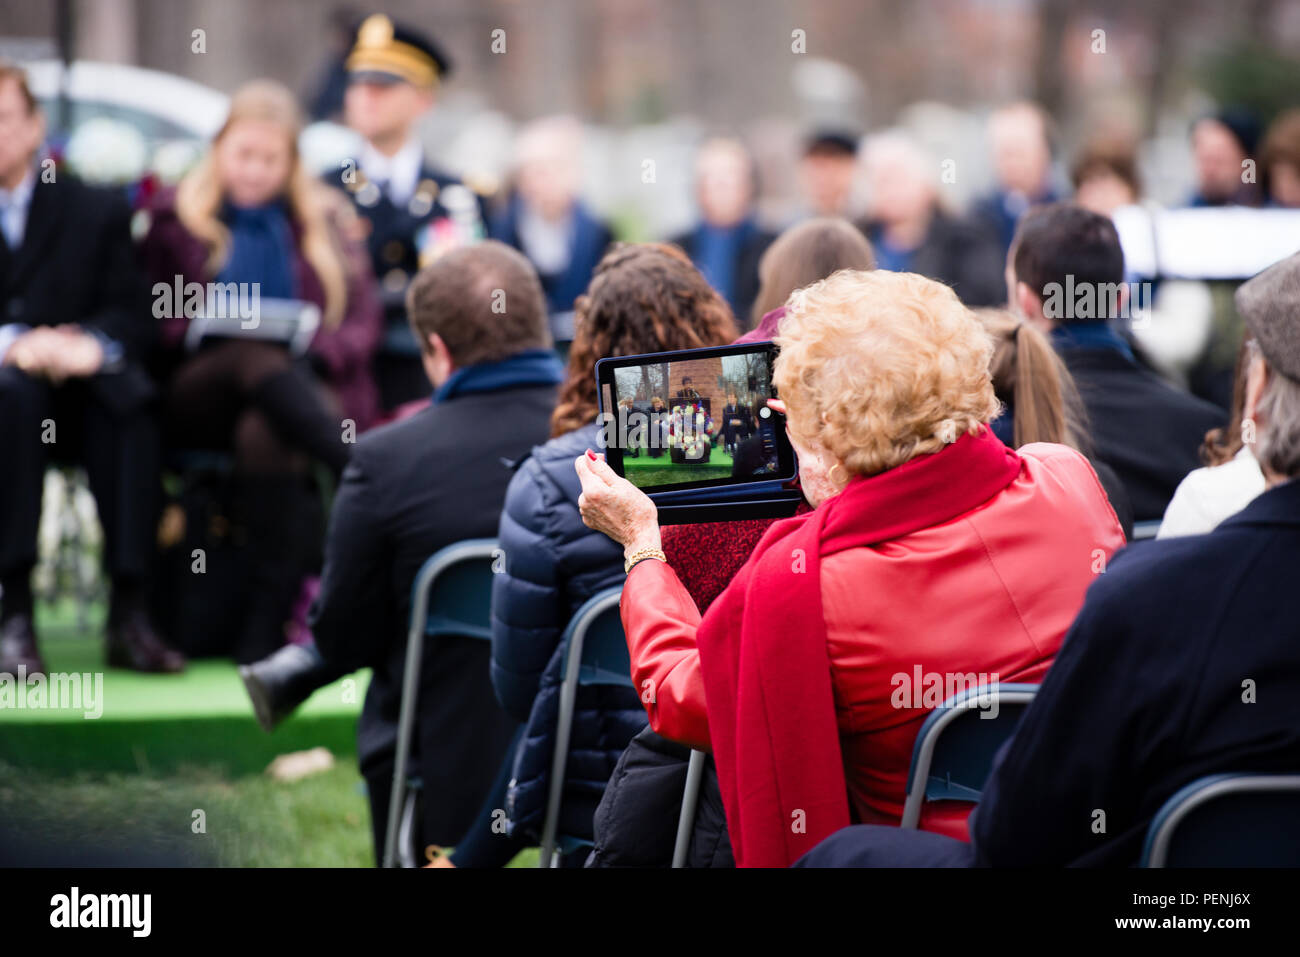 An attendee takes photos of speakers during the Pan Am Flight 103 memorial ceremony in Arlington National Cemetery, Dec. 21, 2015, in Arlington, Va. A terrorist’s bomb destroyed the aircraft 27 years ago, in what became known as the “Lockerbie bombing,” killing 243 passengers, 16 crew members and 11 people on the ground. (U.S. Army photo by Rachel Larue/Arlington National Cemetery/released) Stock Photo